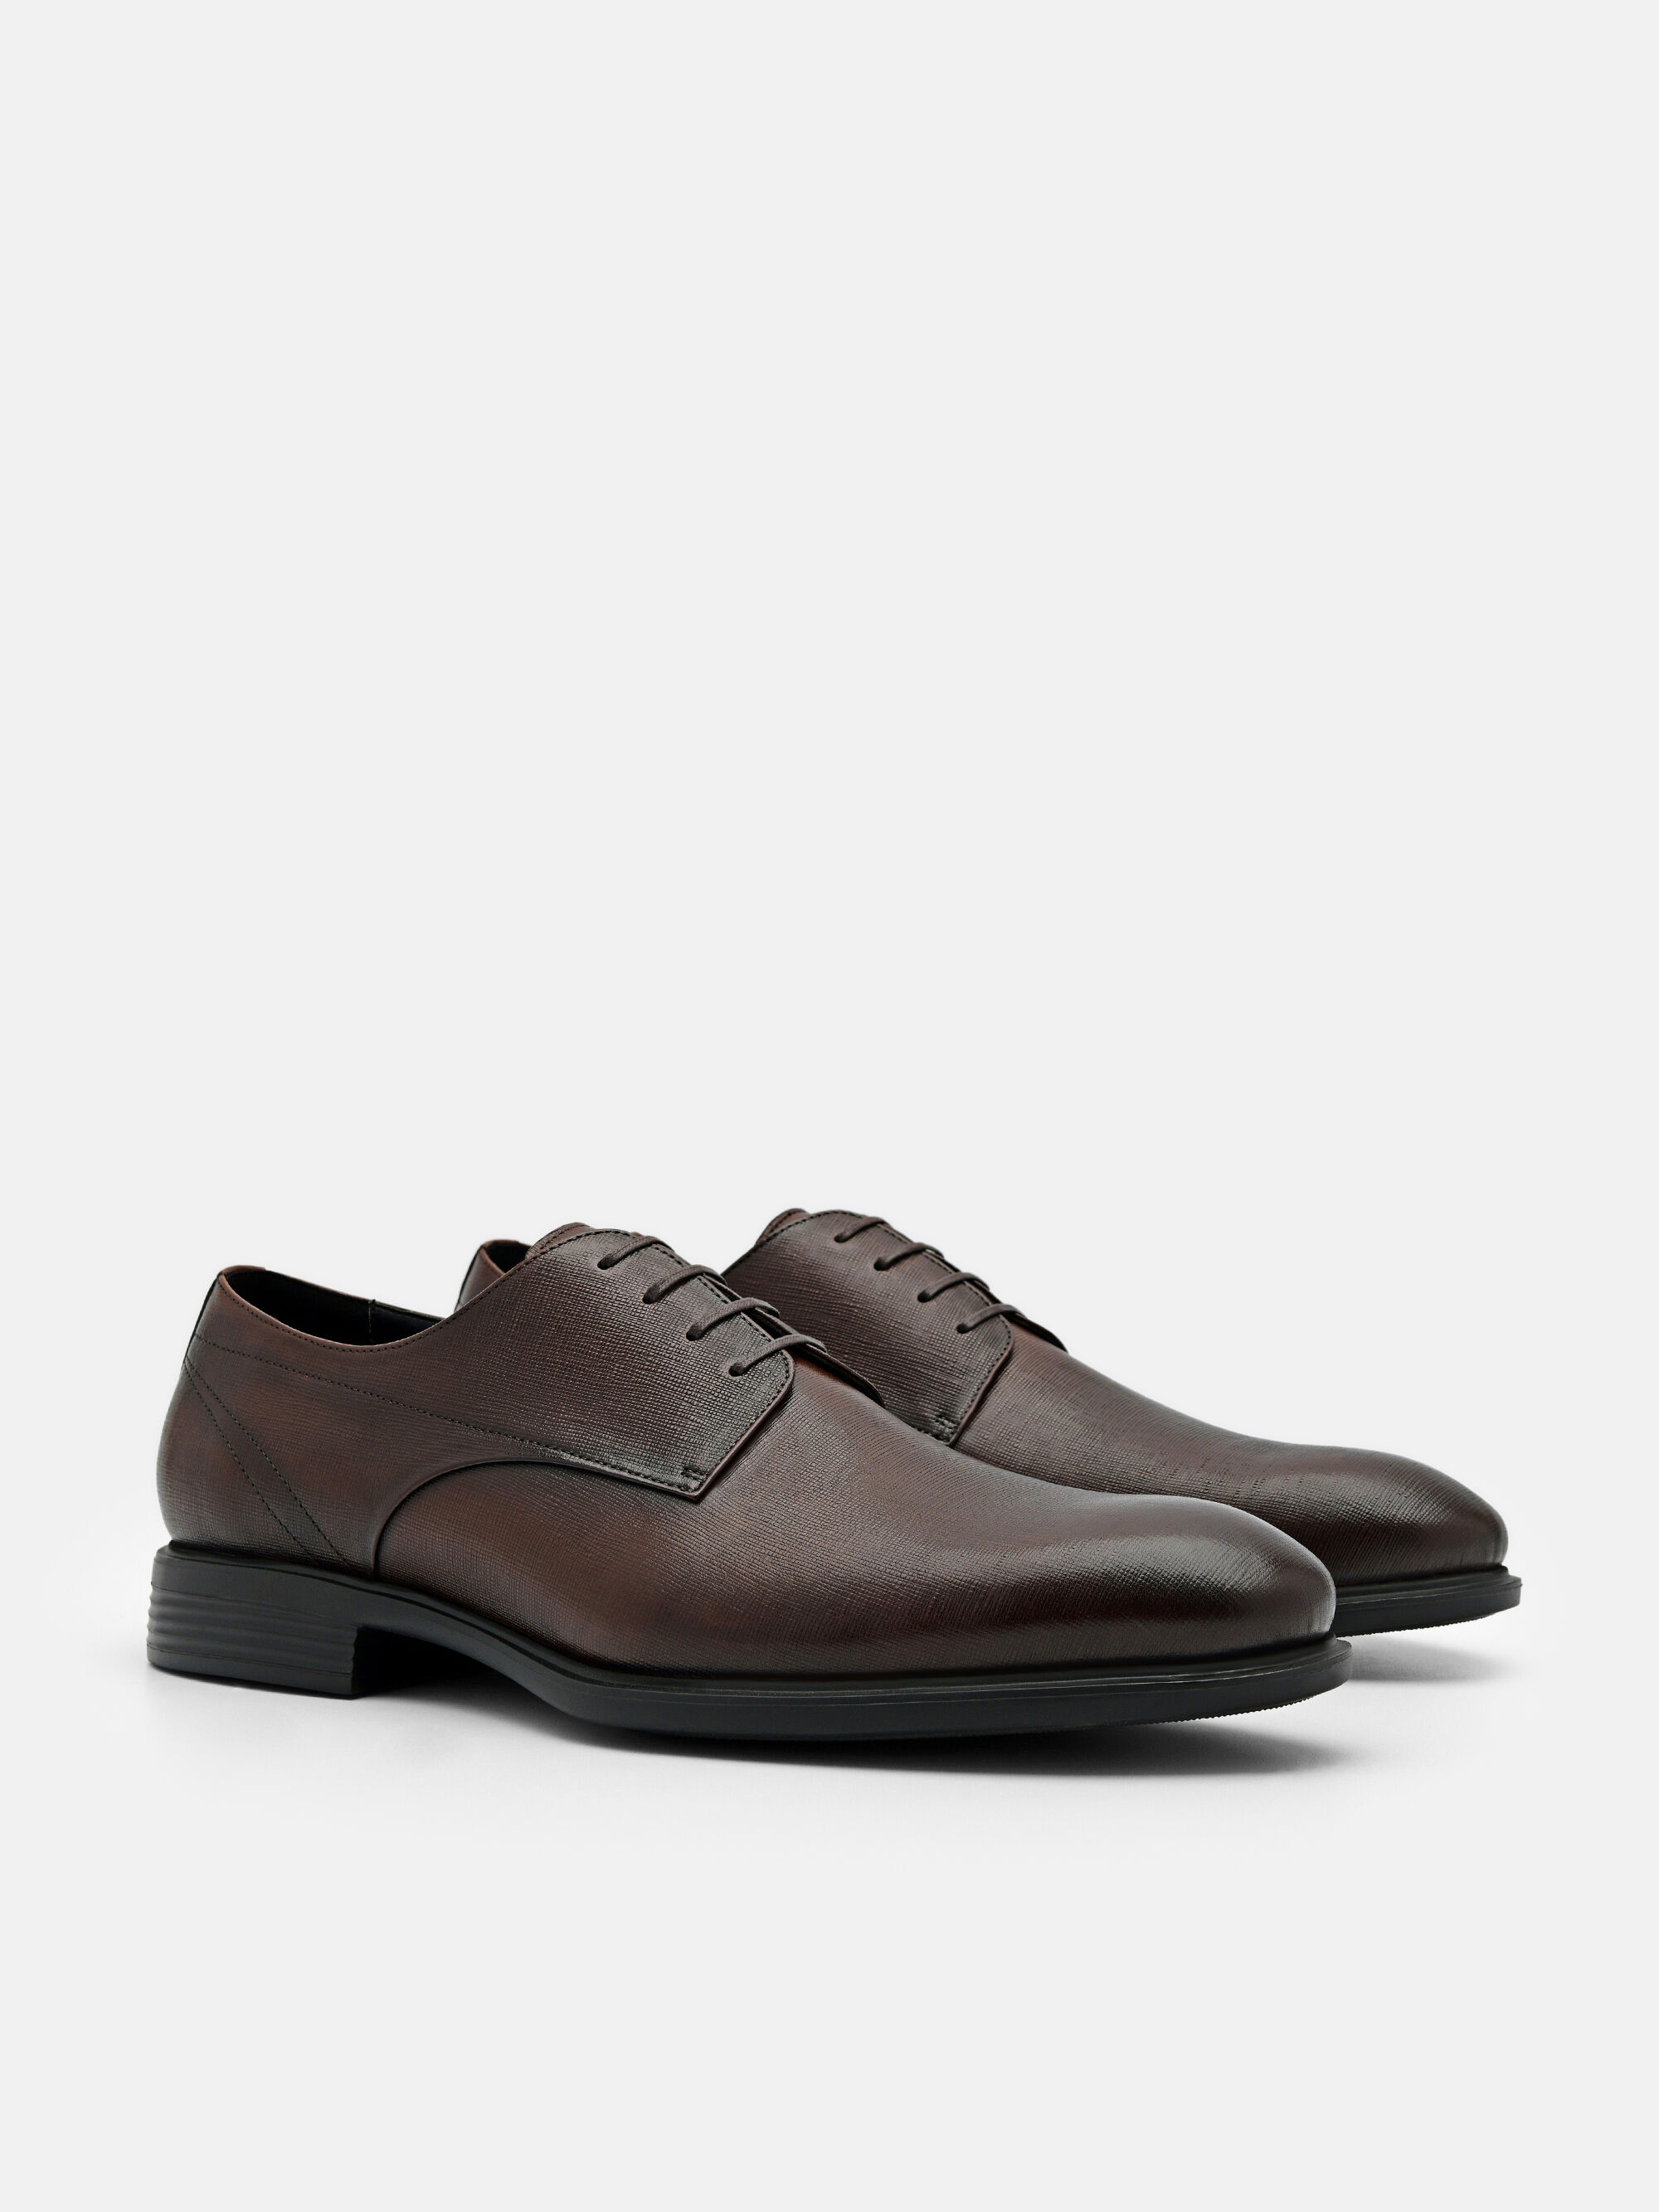 Brown Altitude Lightweight Leather Derby Shoes - PEDRO SG